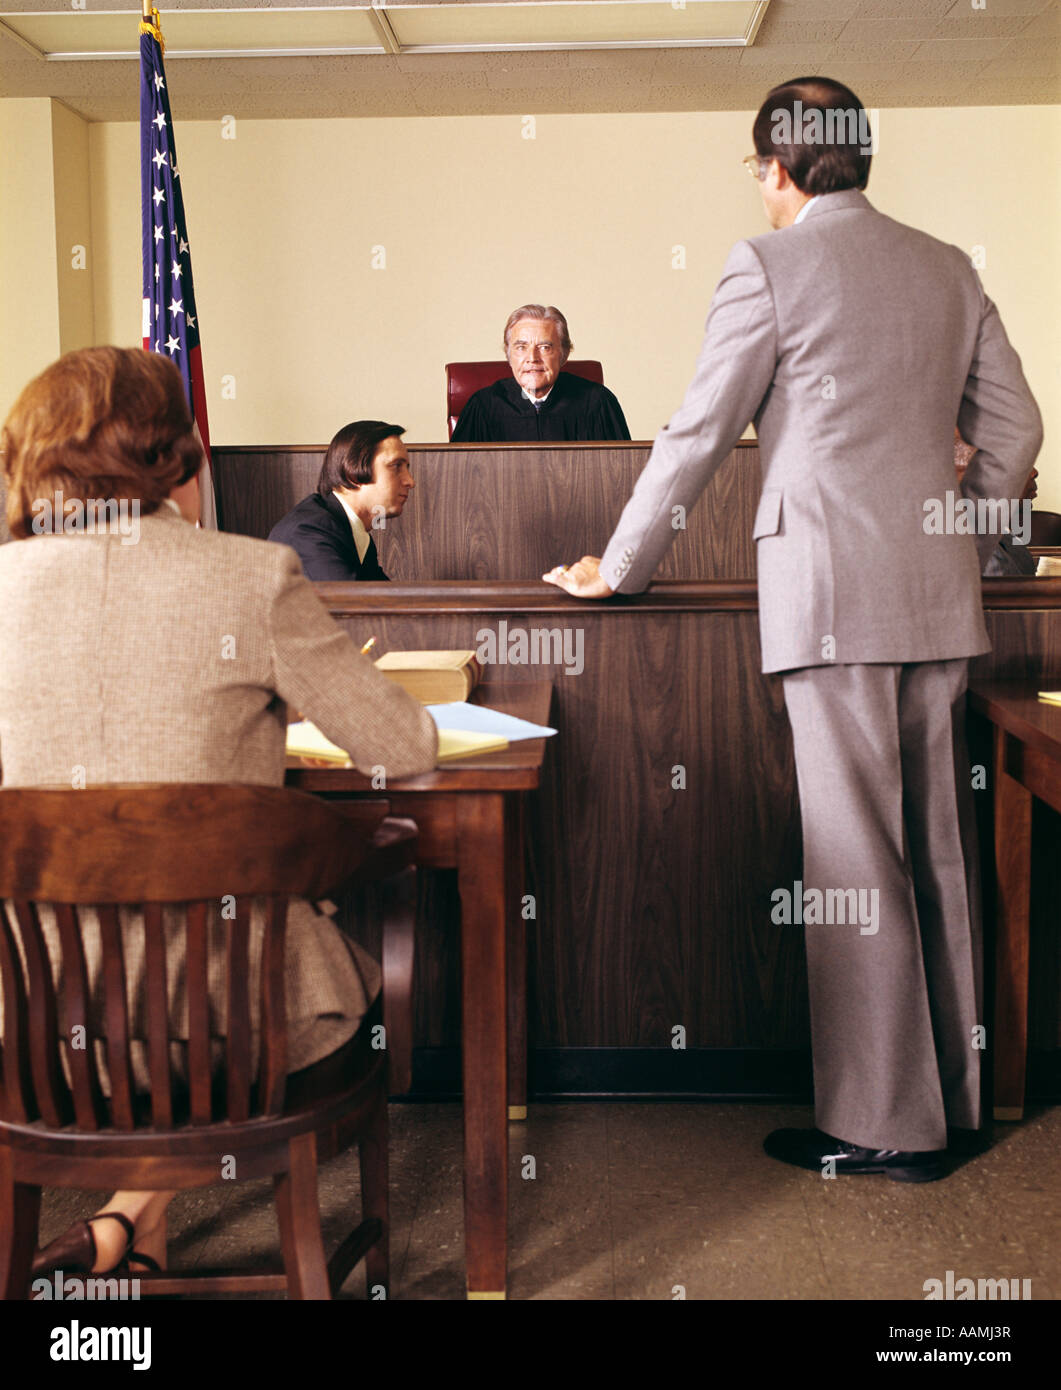 1970s COURTROOM JUDGE ON BENCH LISTEN TO ATTORNEY MAN PLEAD CASE STANDING WOMAN LAWYER SIT AT DESK LAW LEGAL COURT Stock Photo